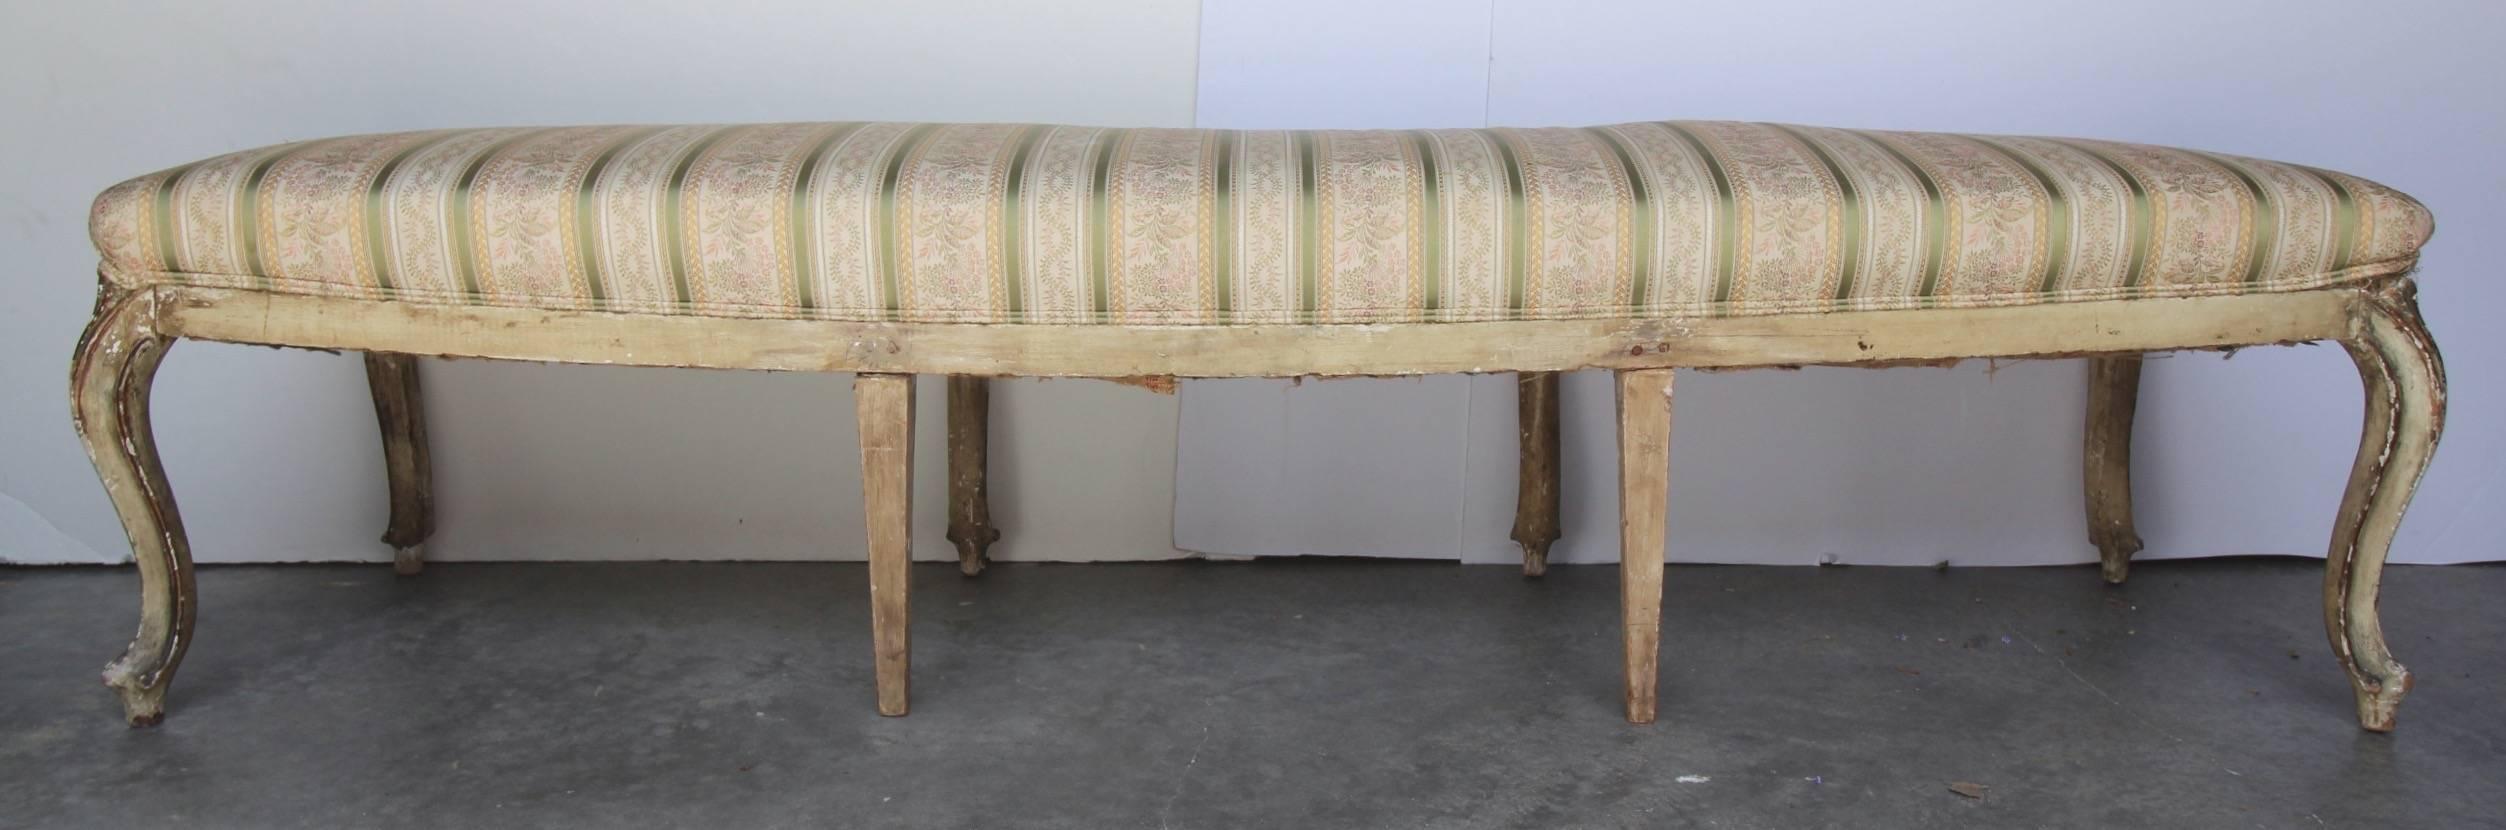 18th Century French Louis XV Painted Banquette or Bench For Sale 2